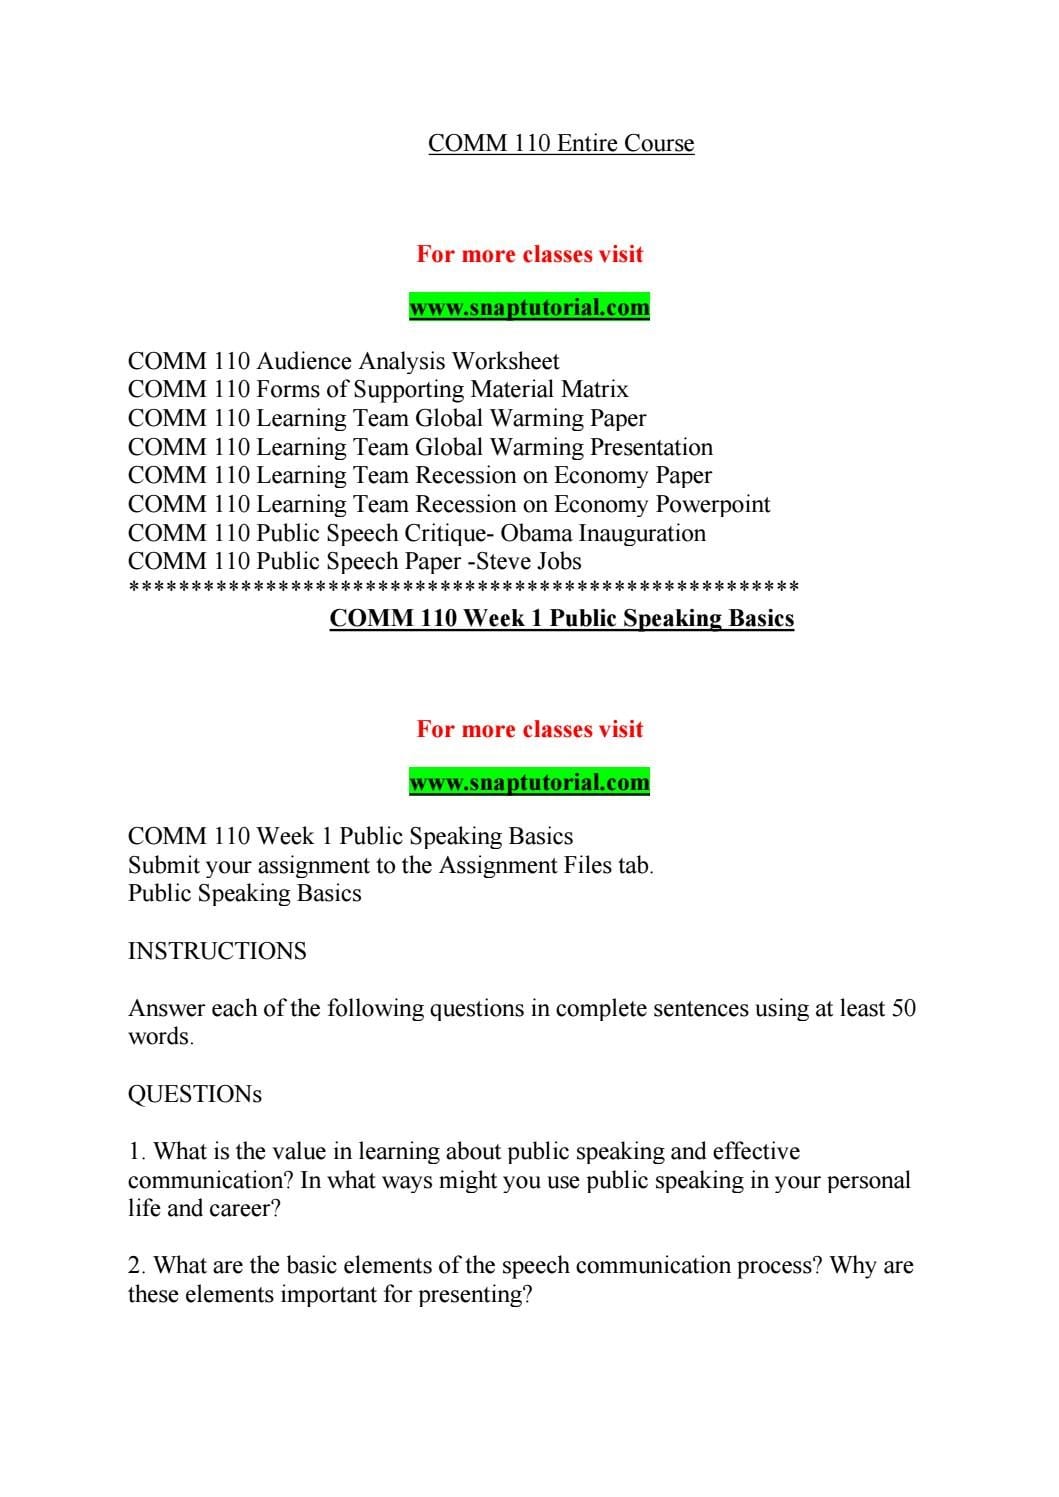 Comm 110 Course Teaching Resources Snaptutorial Com Also Public Speaking Basics Worksheet